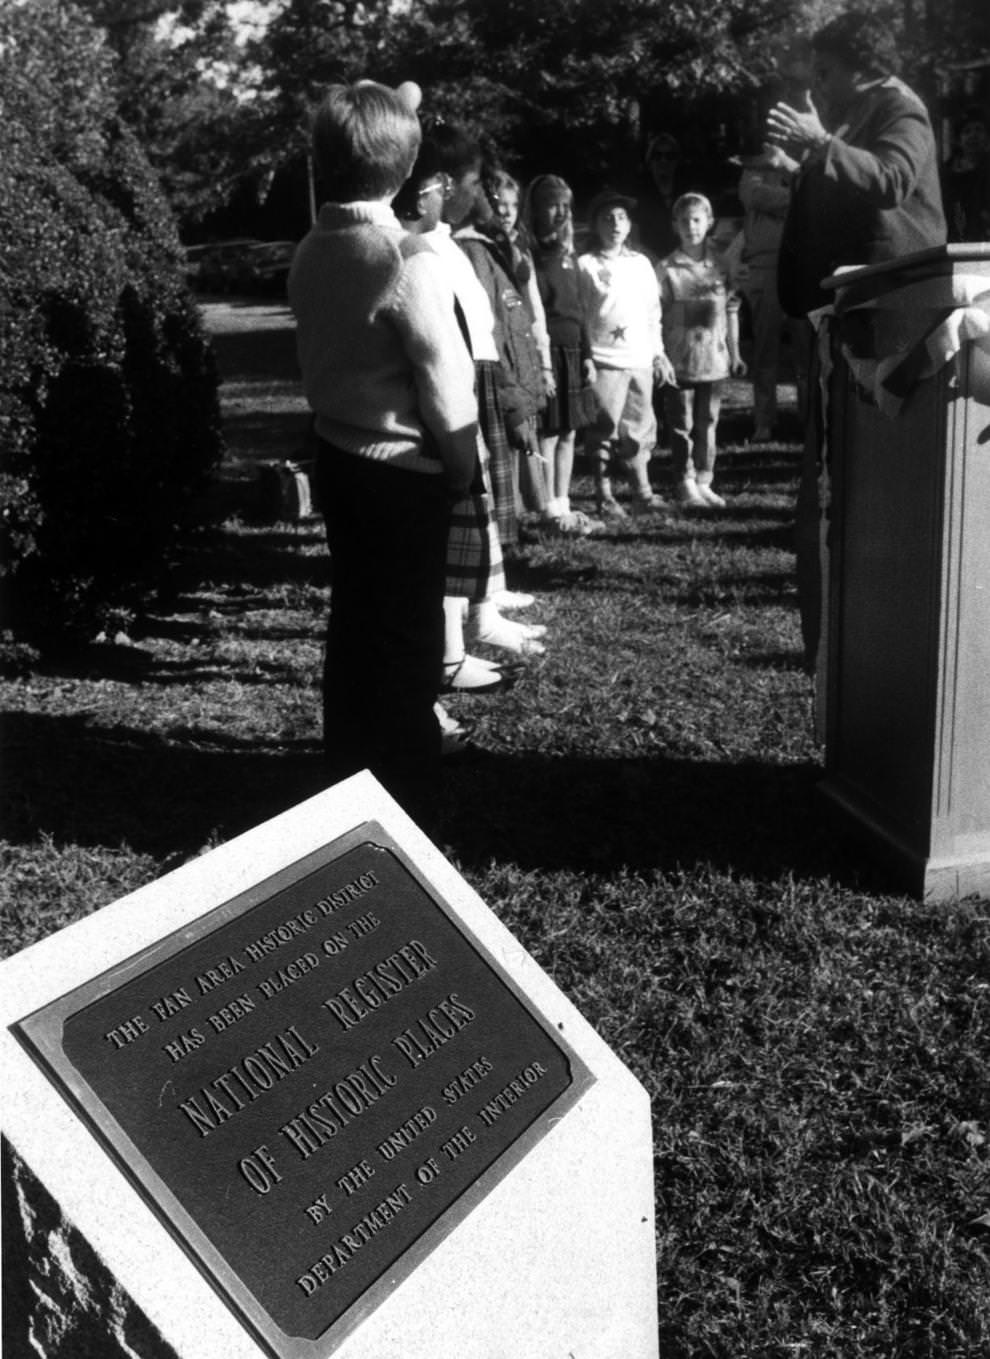 A plaque dedication ceremony marked the addition of Richmond’s Fan District to the National Register of Historic Places, 1986